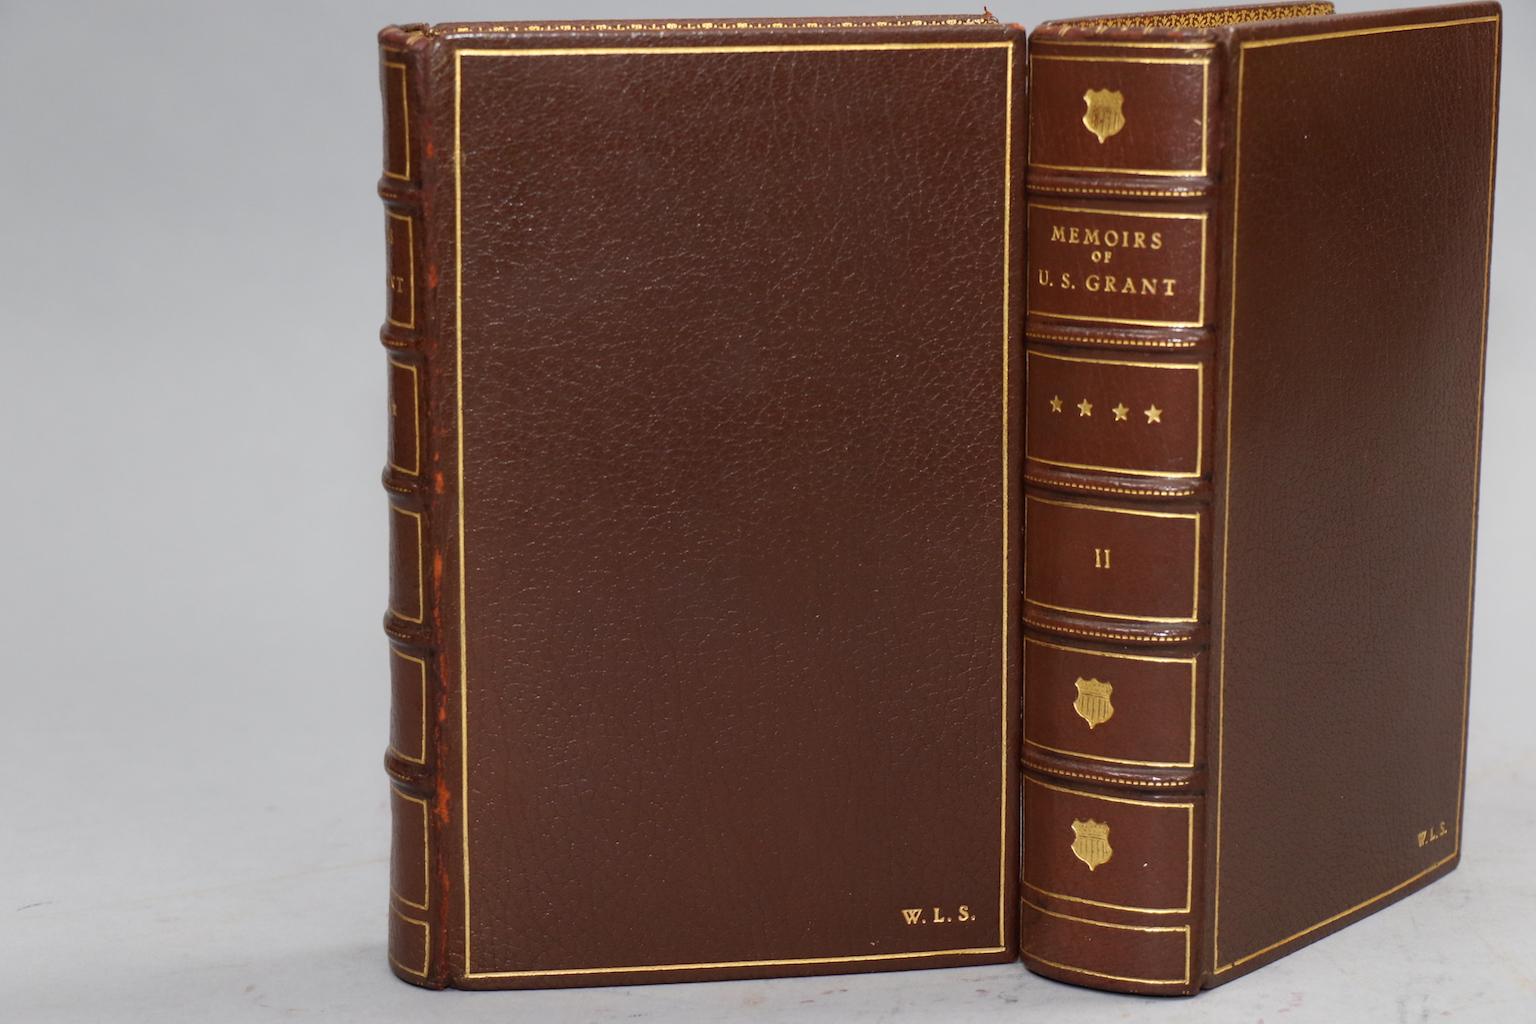 First Edition. Leatherbound. Two volumes. Bound in full brown morocco with top edges gilt, raised bands on to spine, and gilt panels. Very good. Published in New York by Charles L. Webster & Co. in 1885.

All listed dimensions are for a single